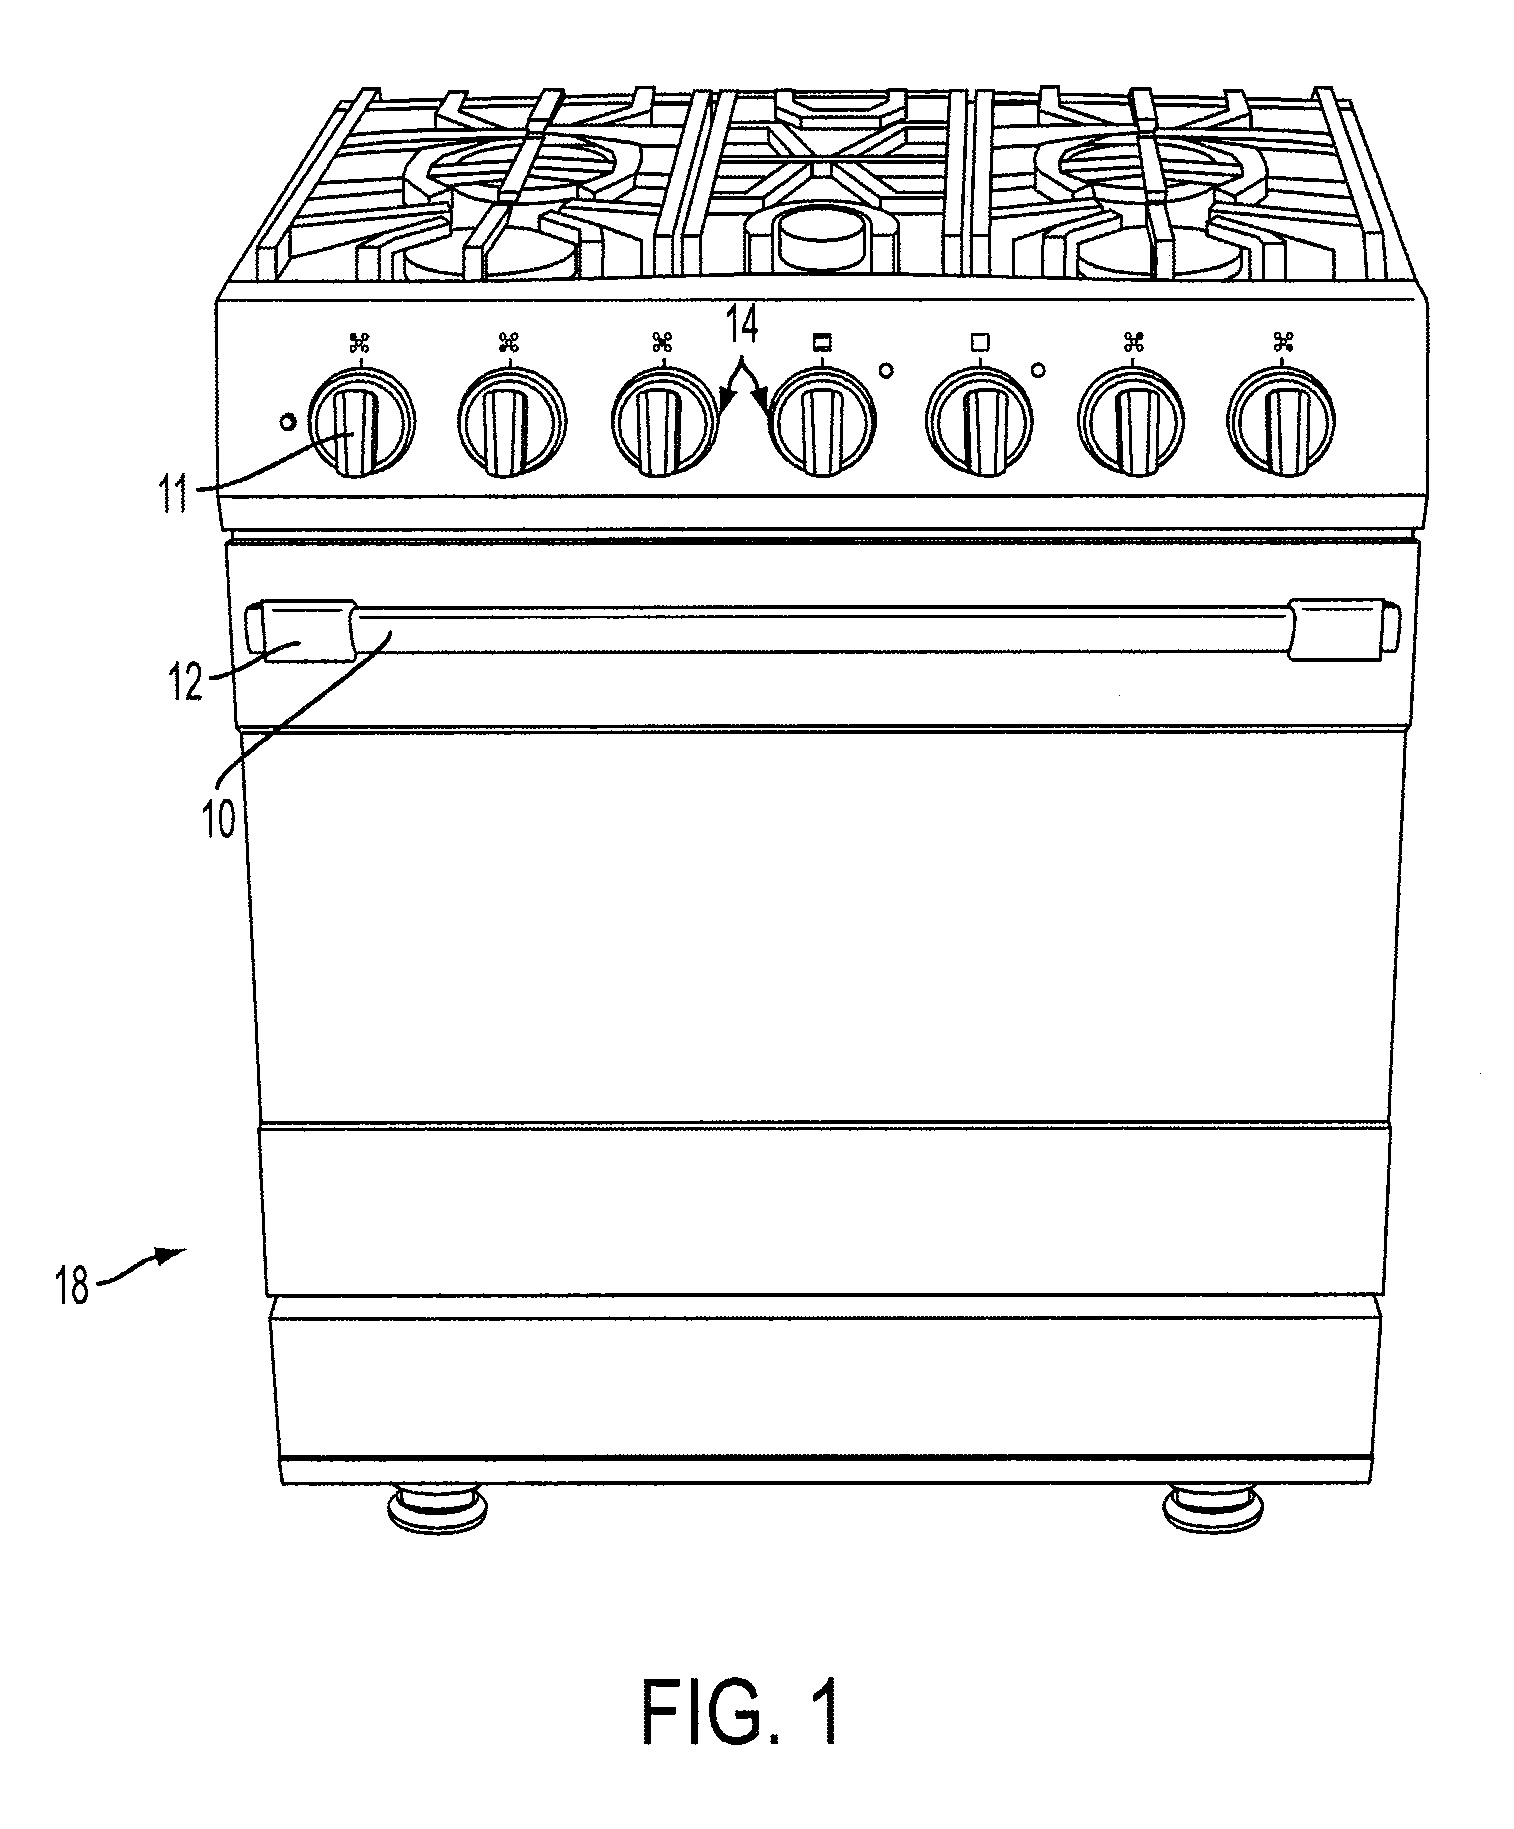 Interchangeable Appliance Insert Components and System